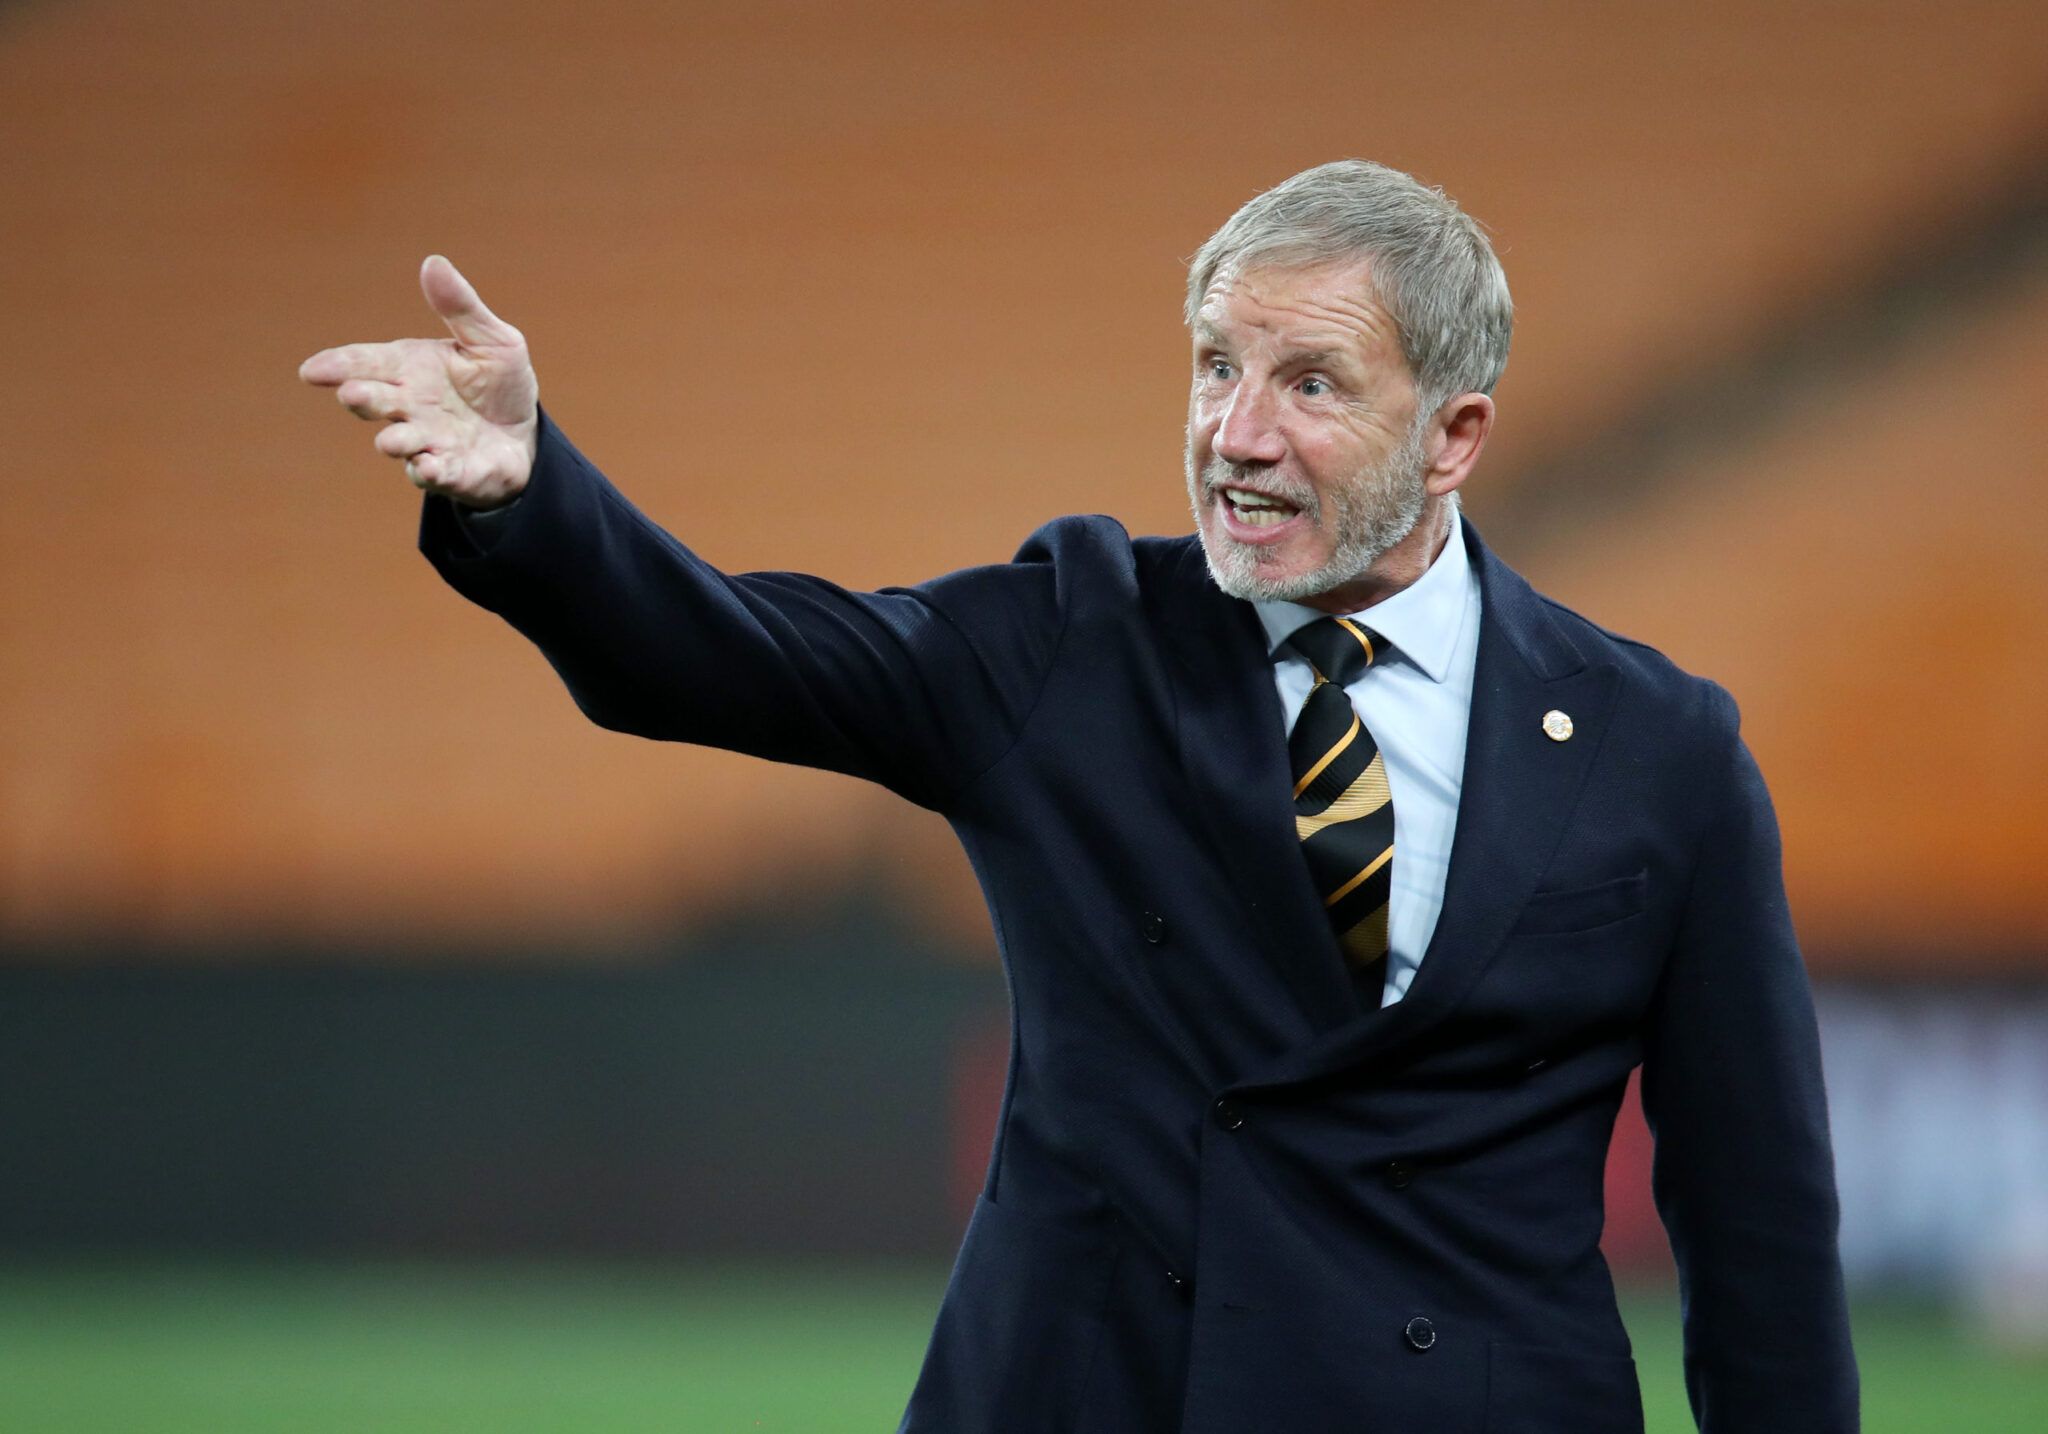 is stuart baxter back in the fold for kaizer chiefs?